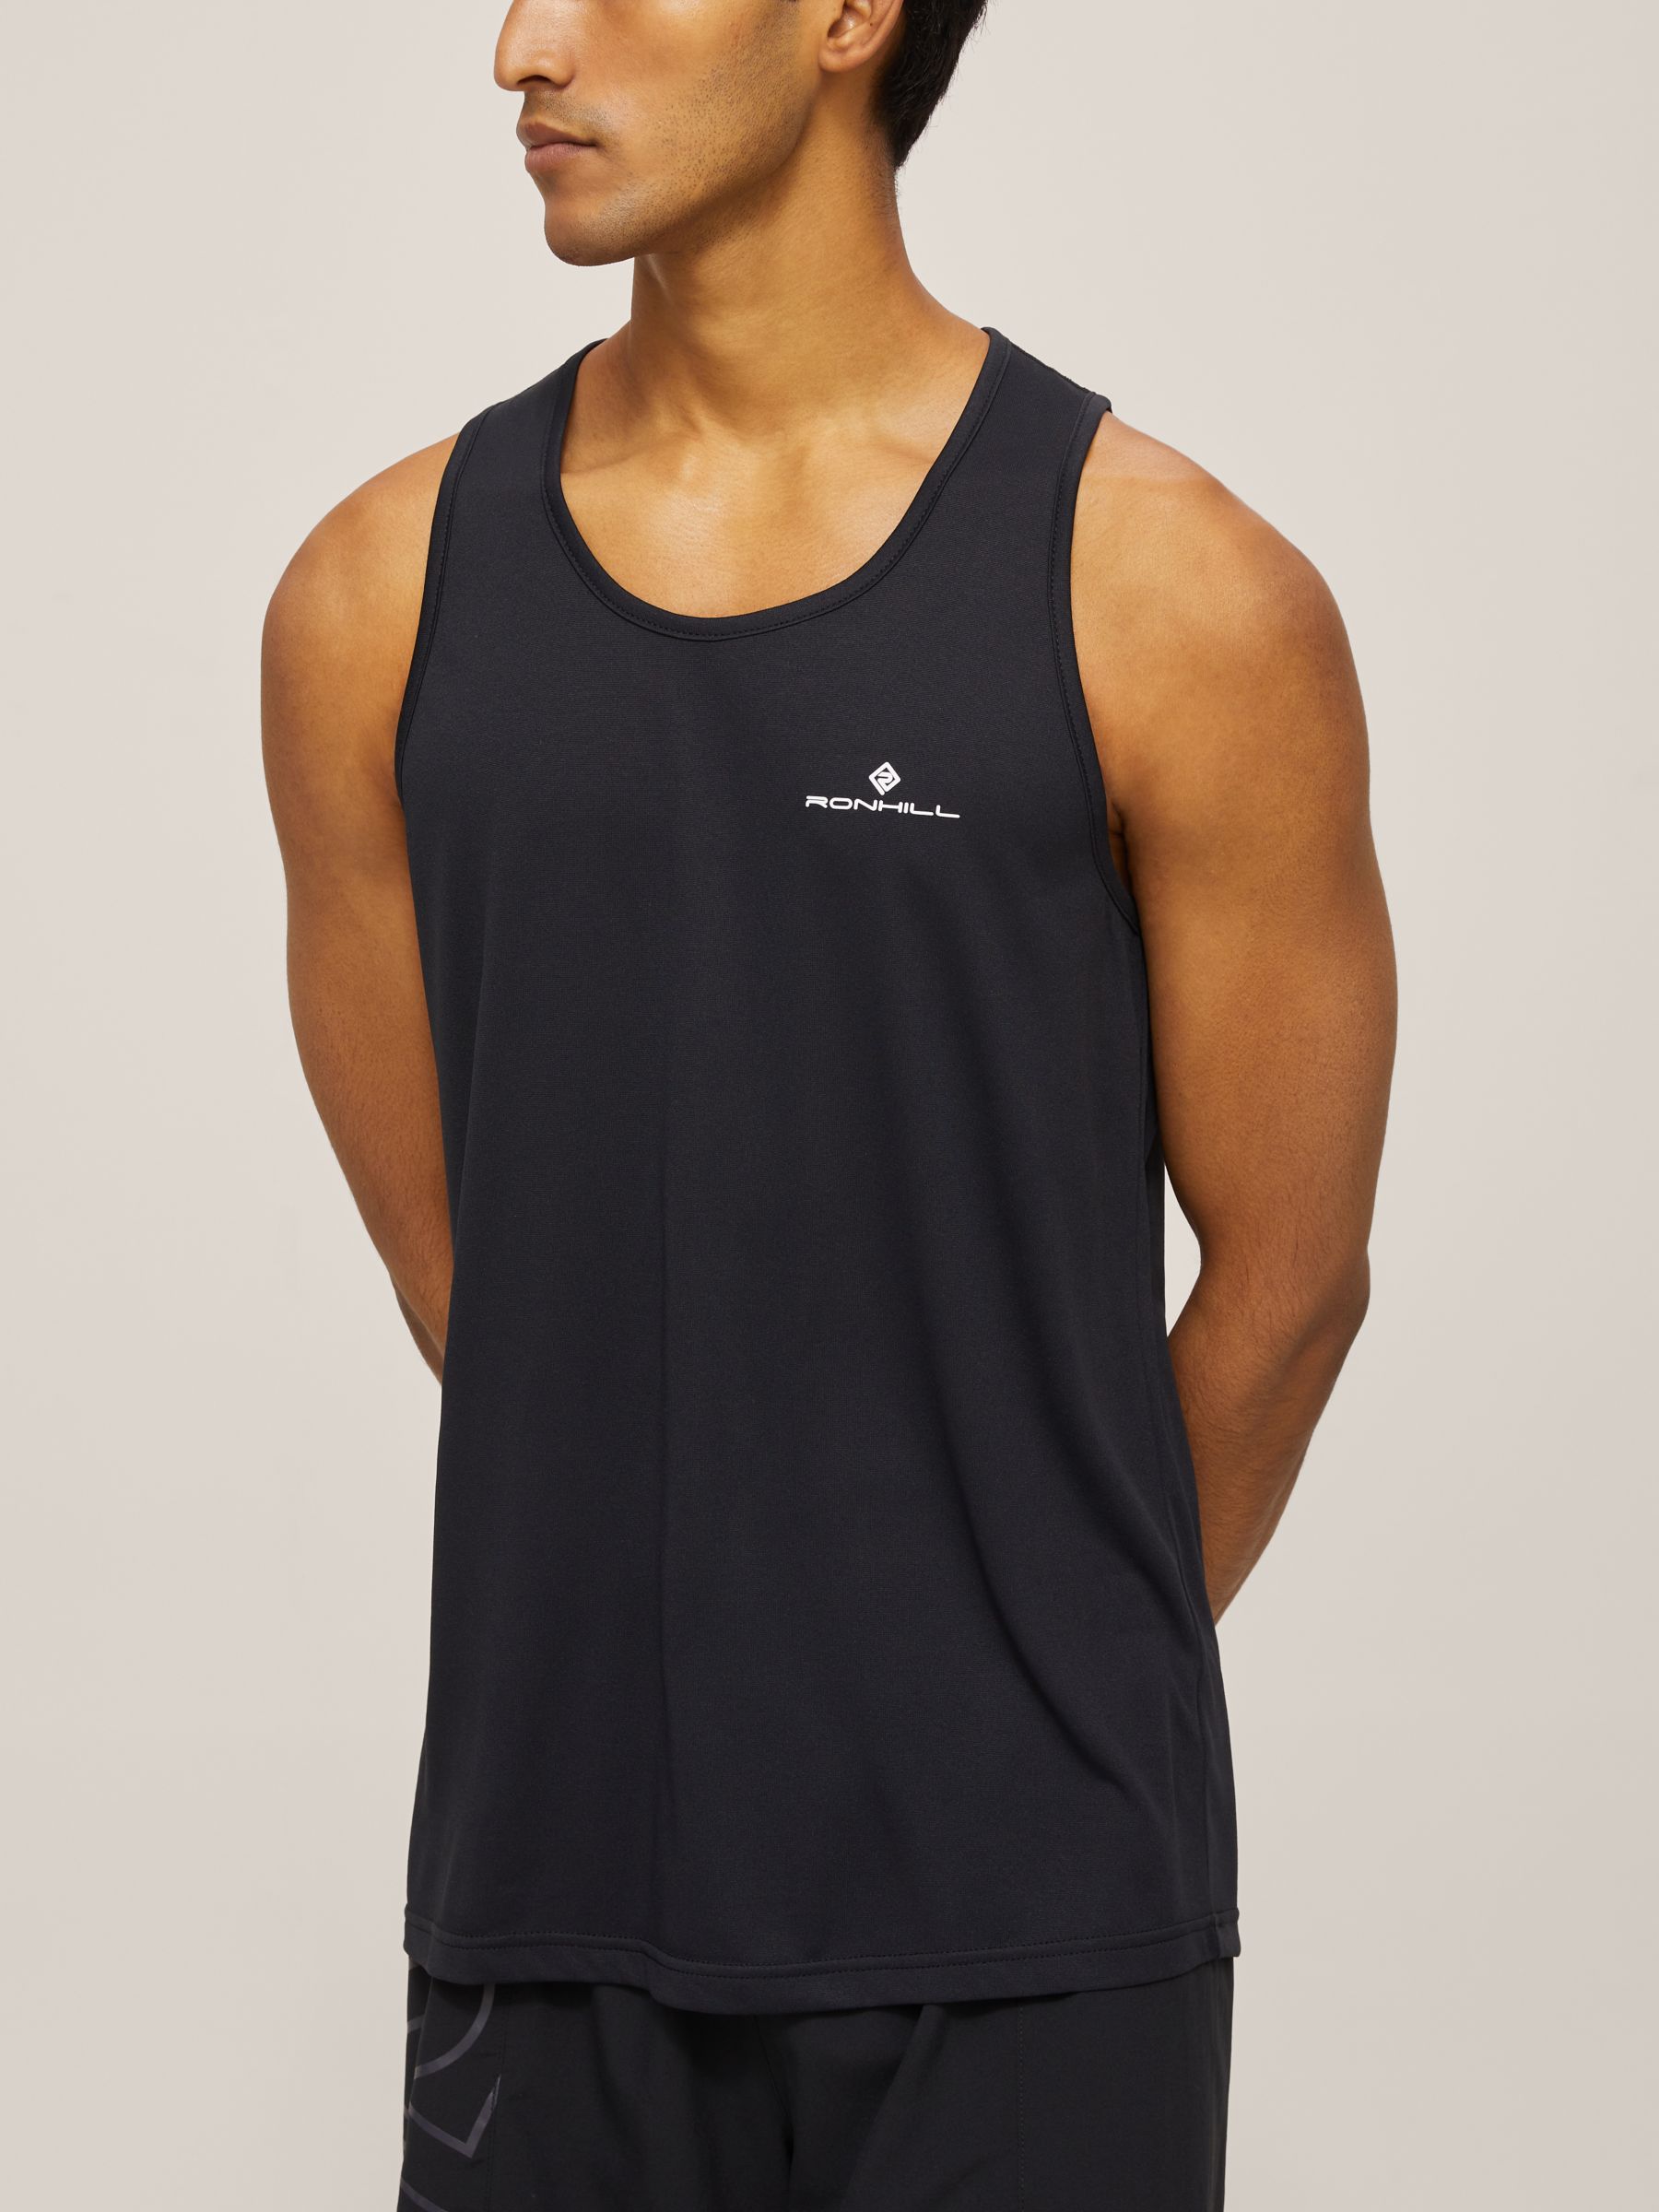 Ronhill Core Running Vest, All Black at John Lewis & Partners